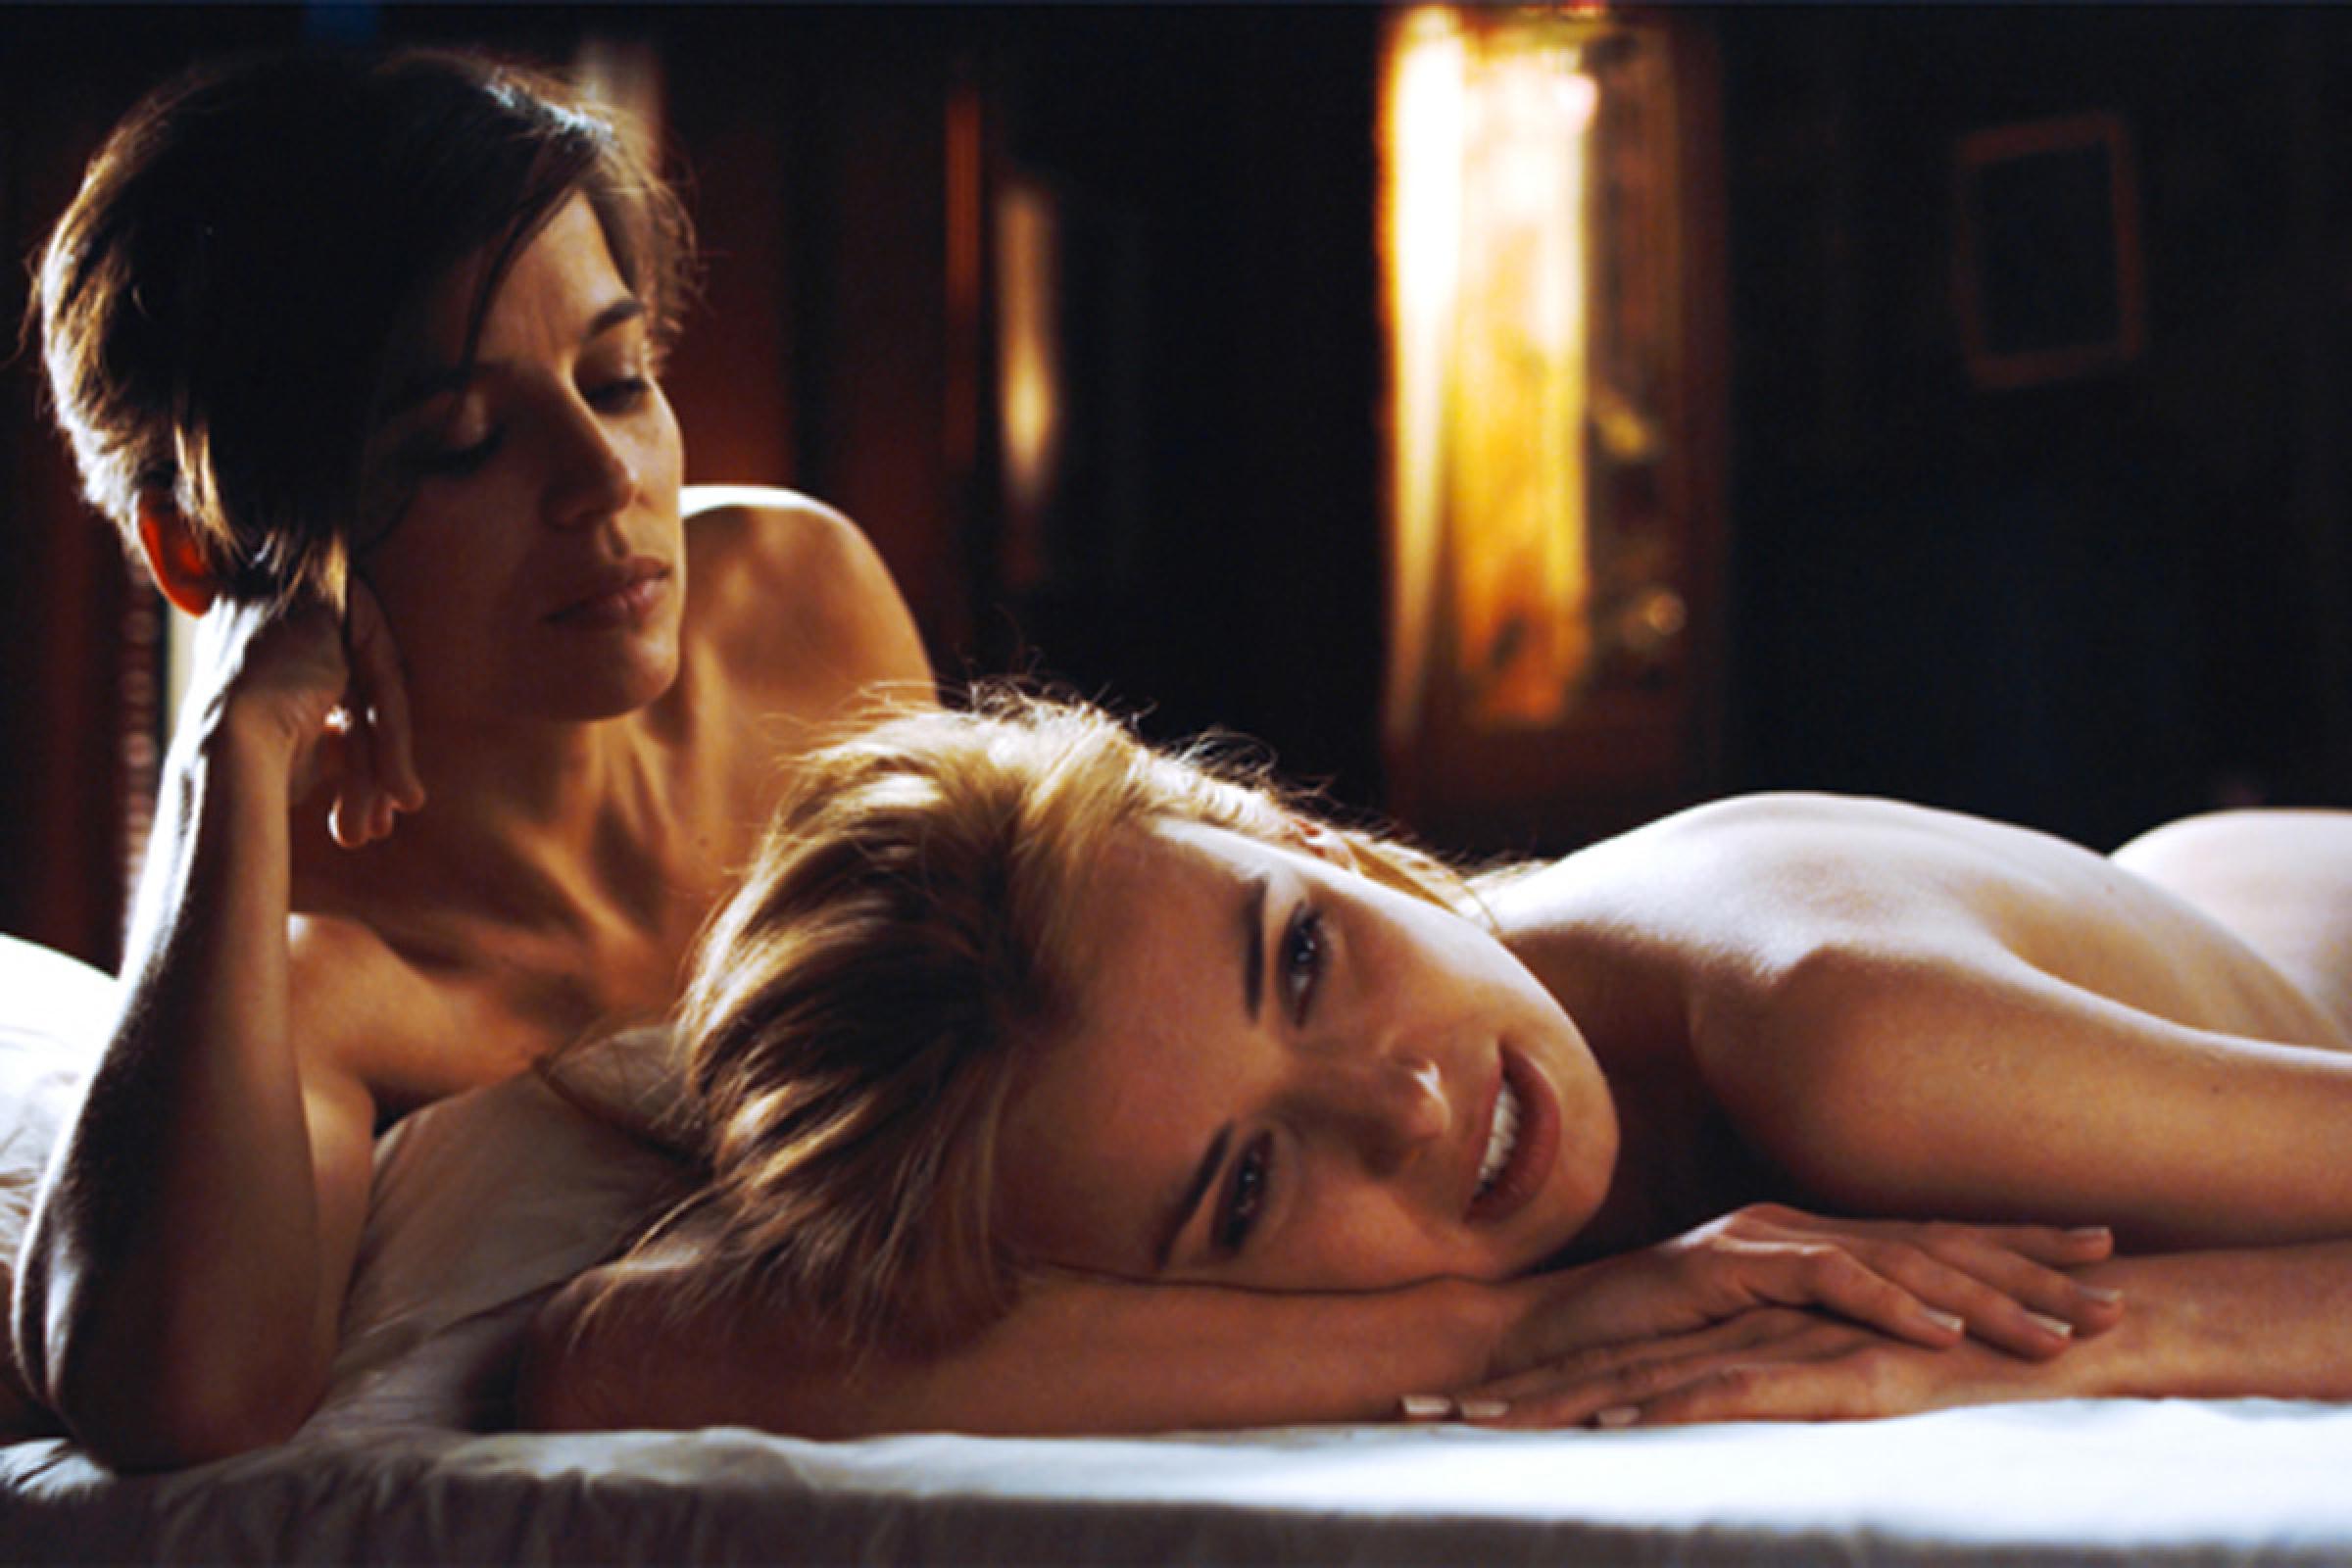 Hottest lesbian sex scene in movies